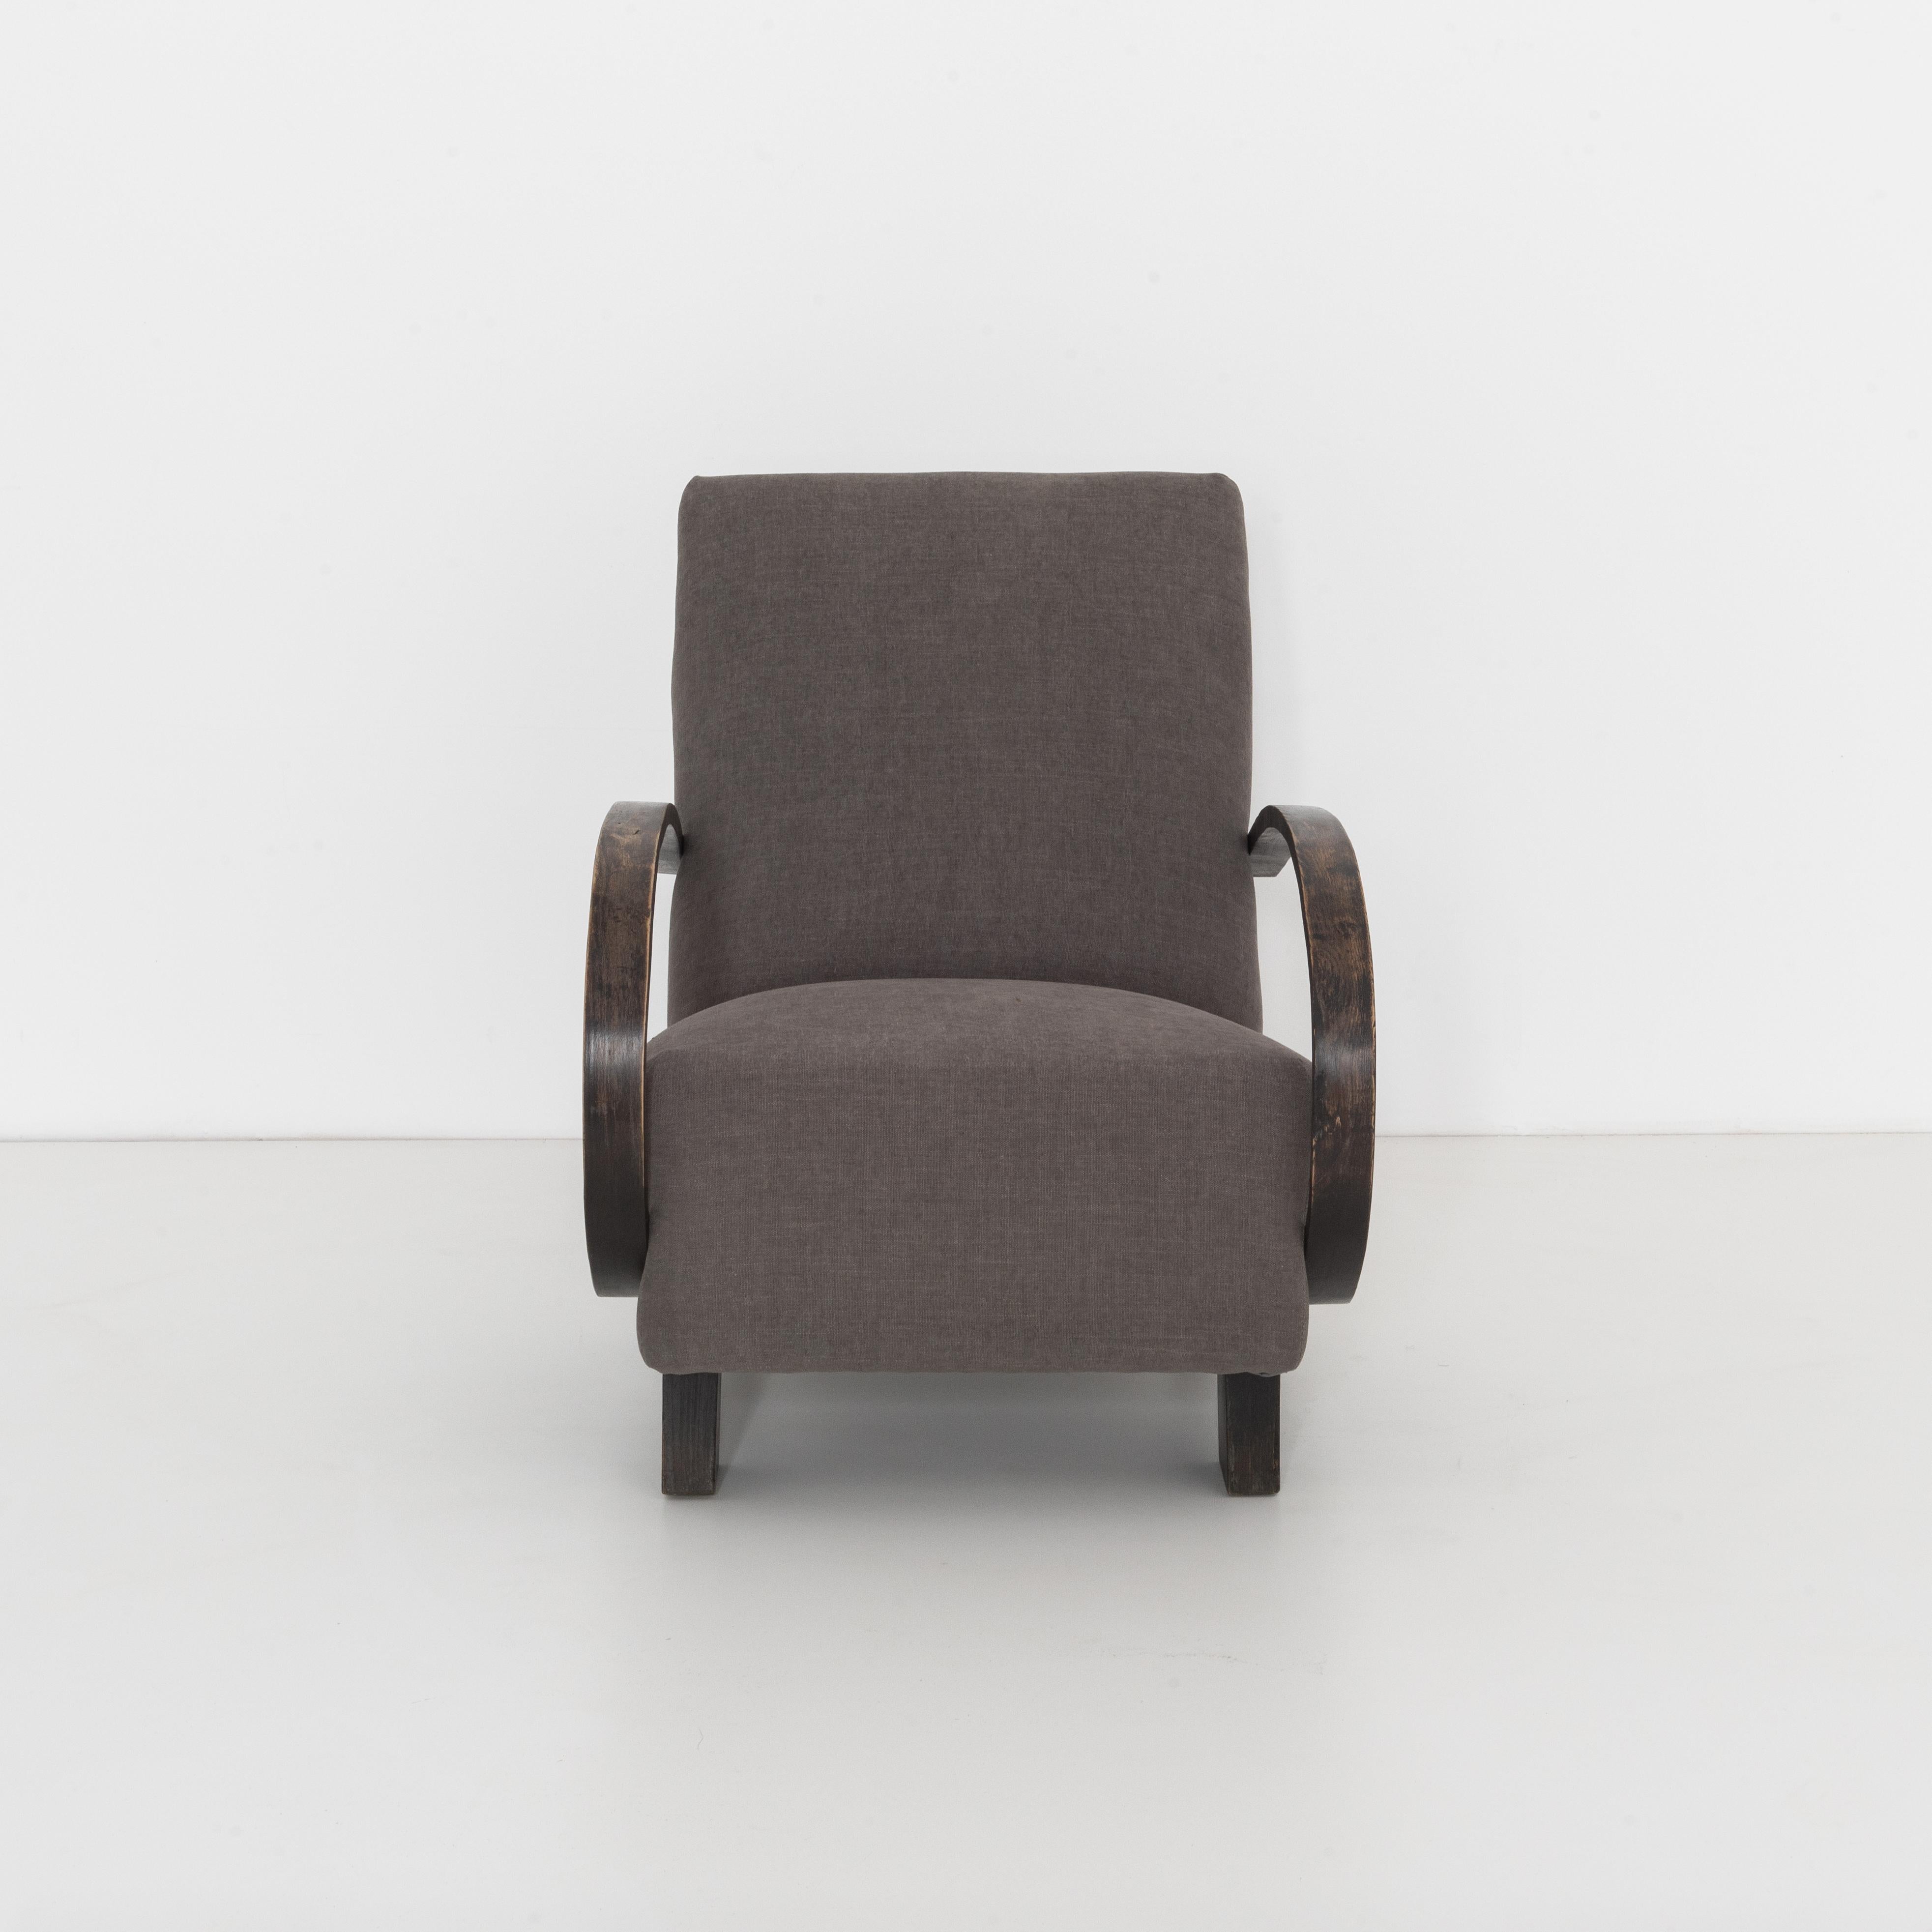 Mid-Century Modern upholstered armchair from Czech Republic, circa 1960. A timeless approach that still looks contemporary and fresh. In the style of Jindřich Halabala with bent beech armrests and geometric legs, re-upholstered with a grey